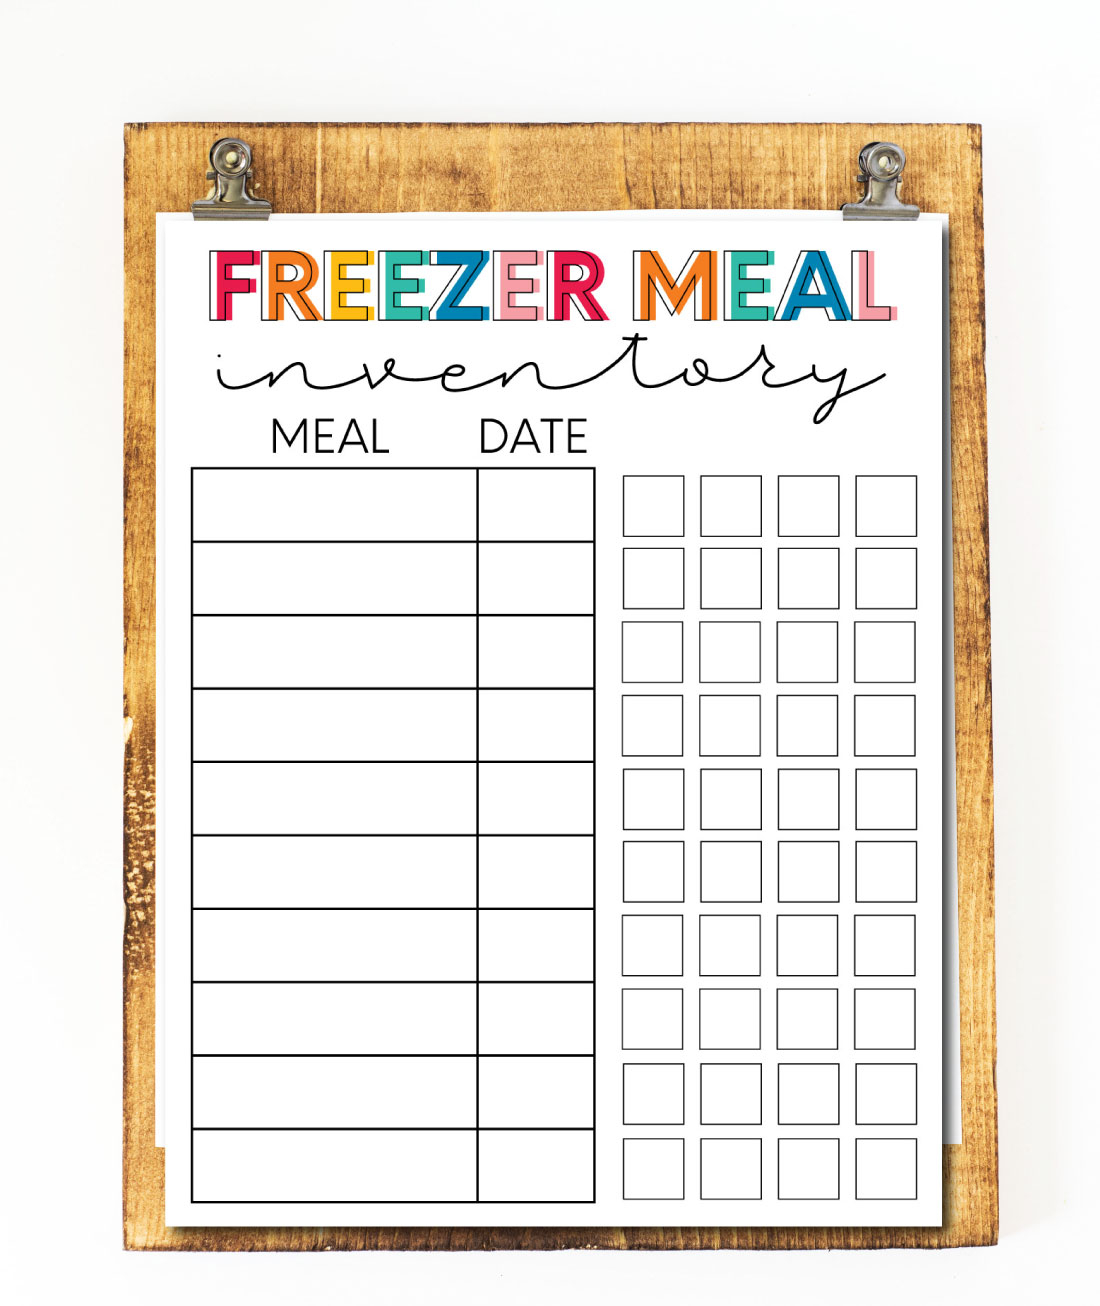 Printable Freezer Meal Inventory